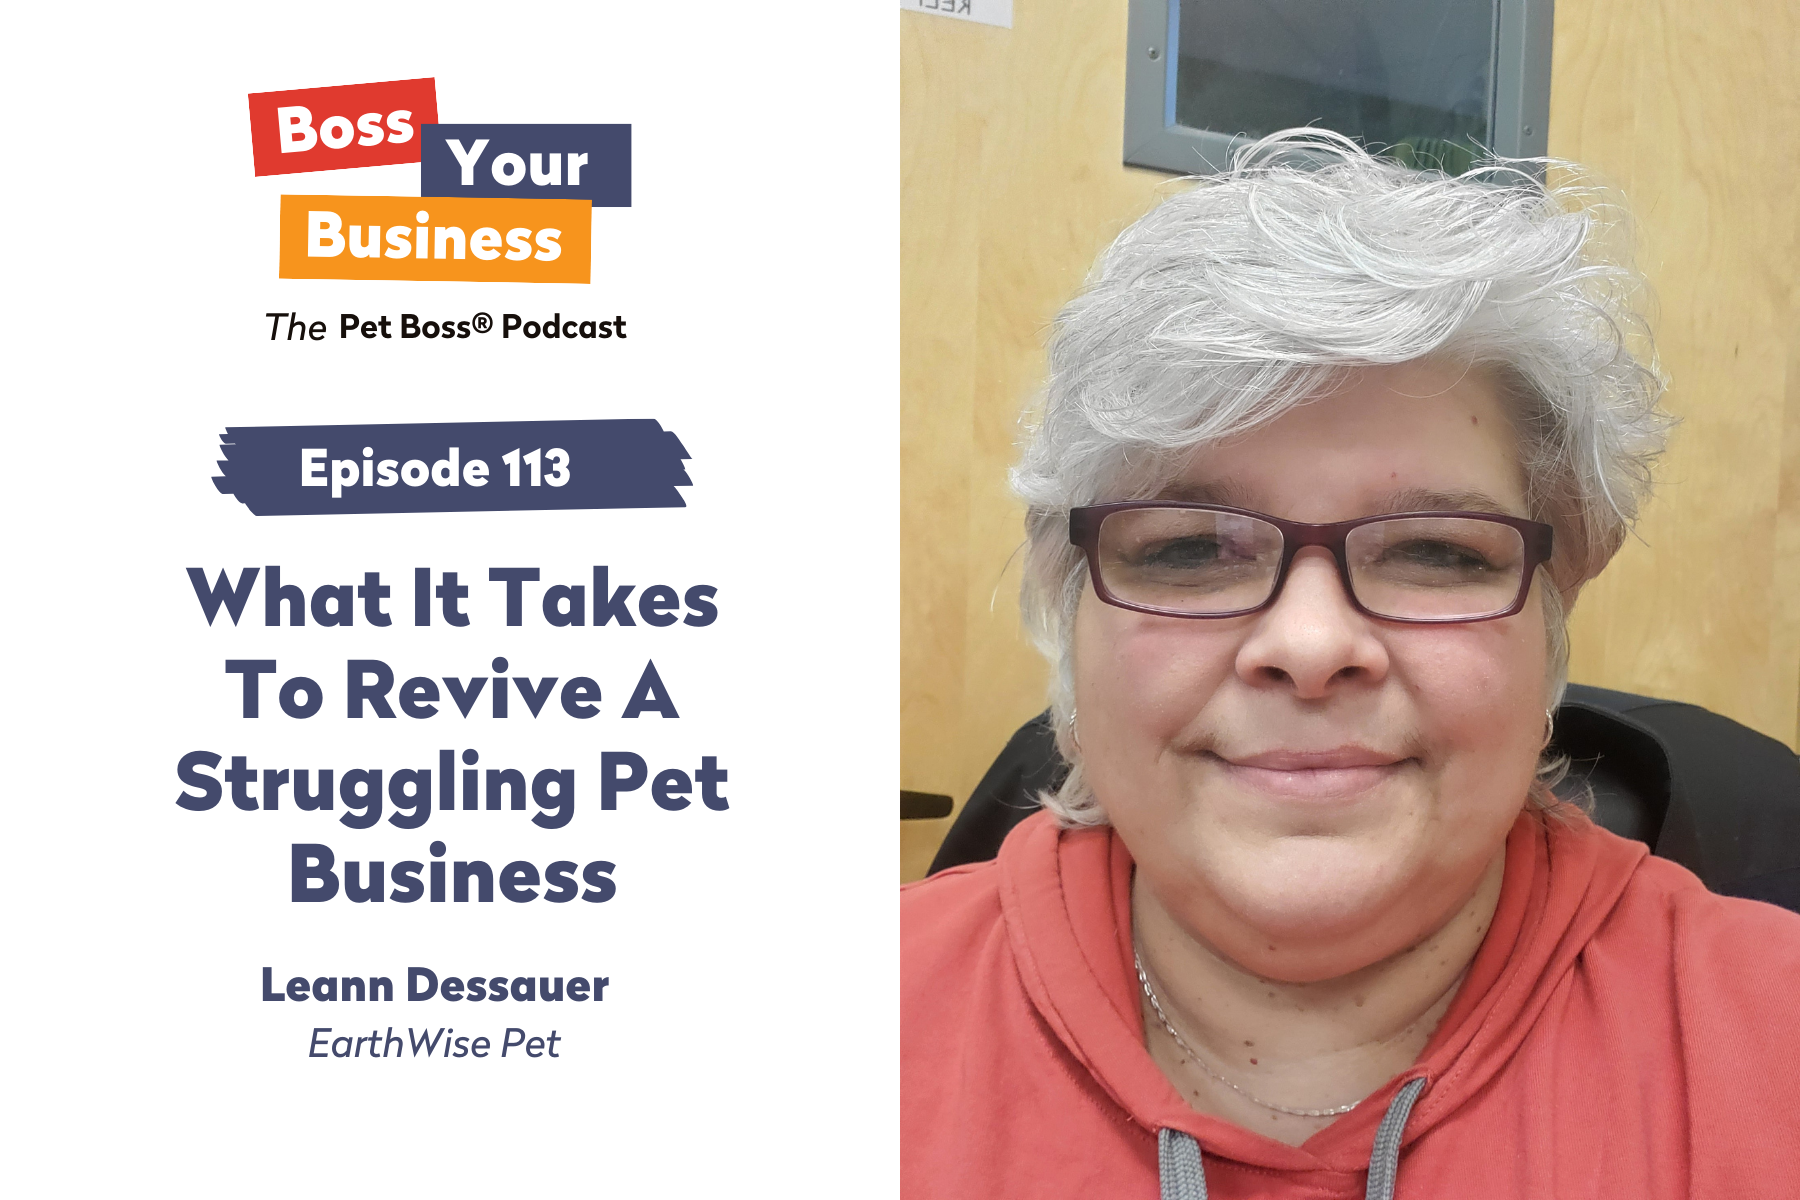 Episode 113 | What It Takes To Revive A Struggling Pet Business